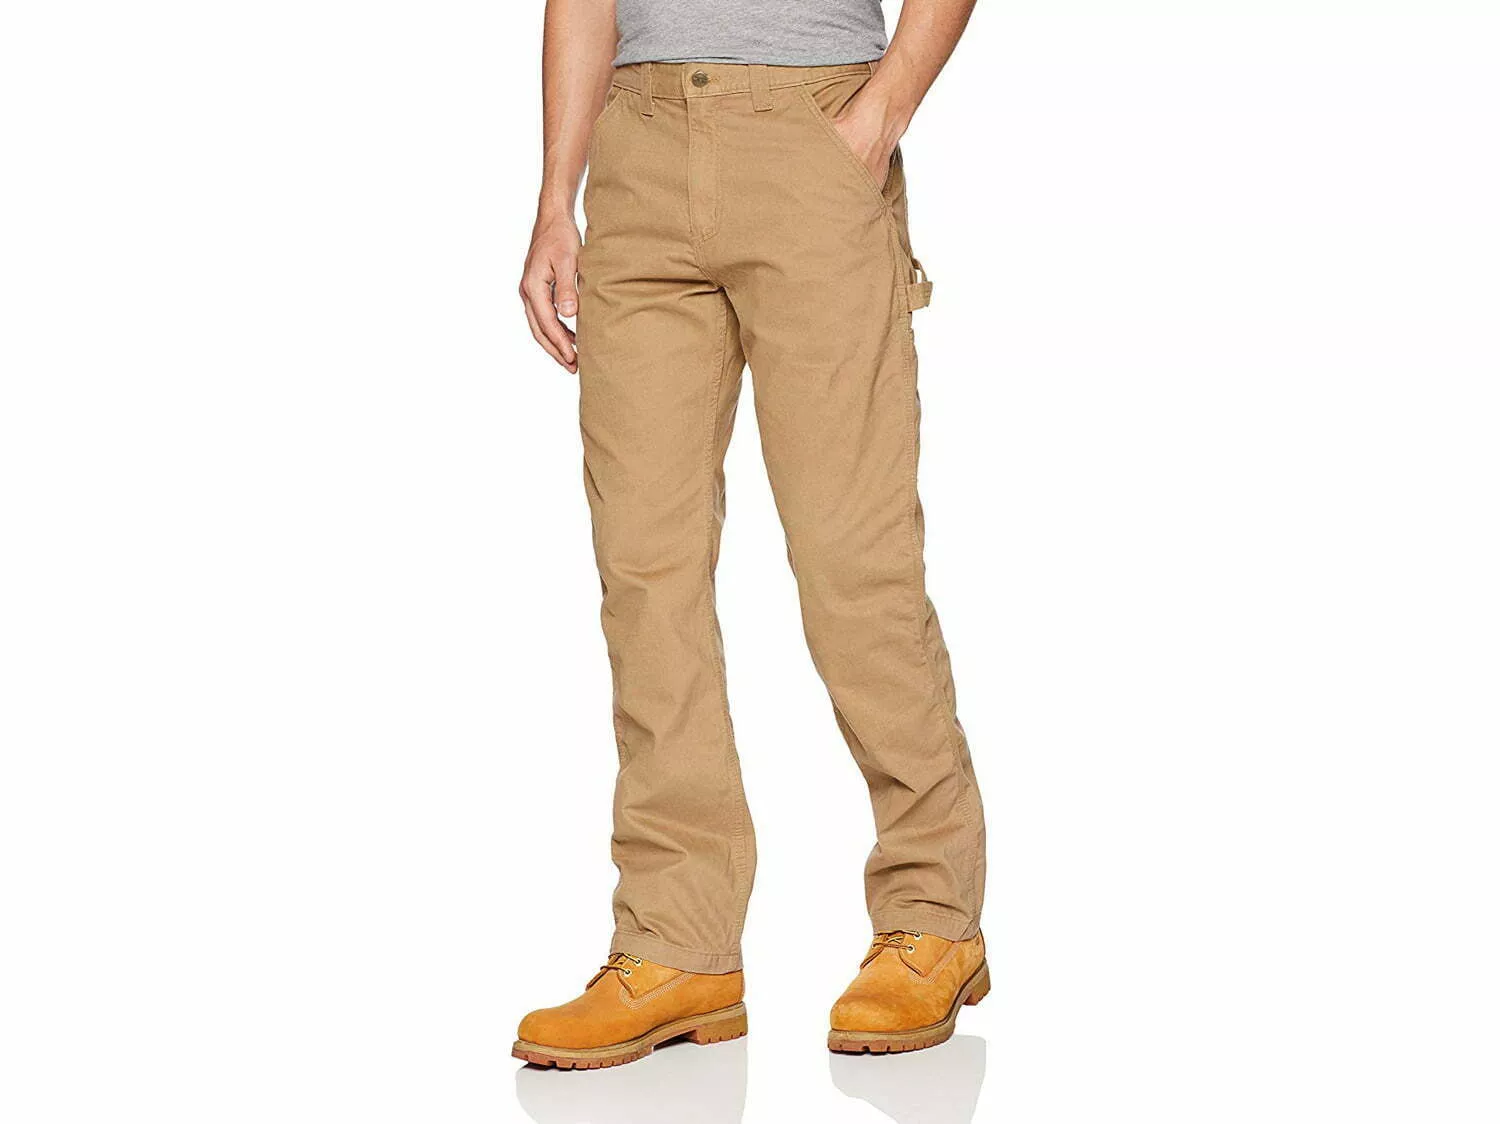 Carhartt Men’s Relaxed-Fit Washed Twill Dungaree Pant